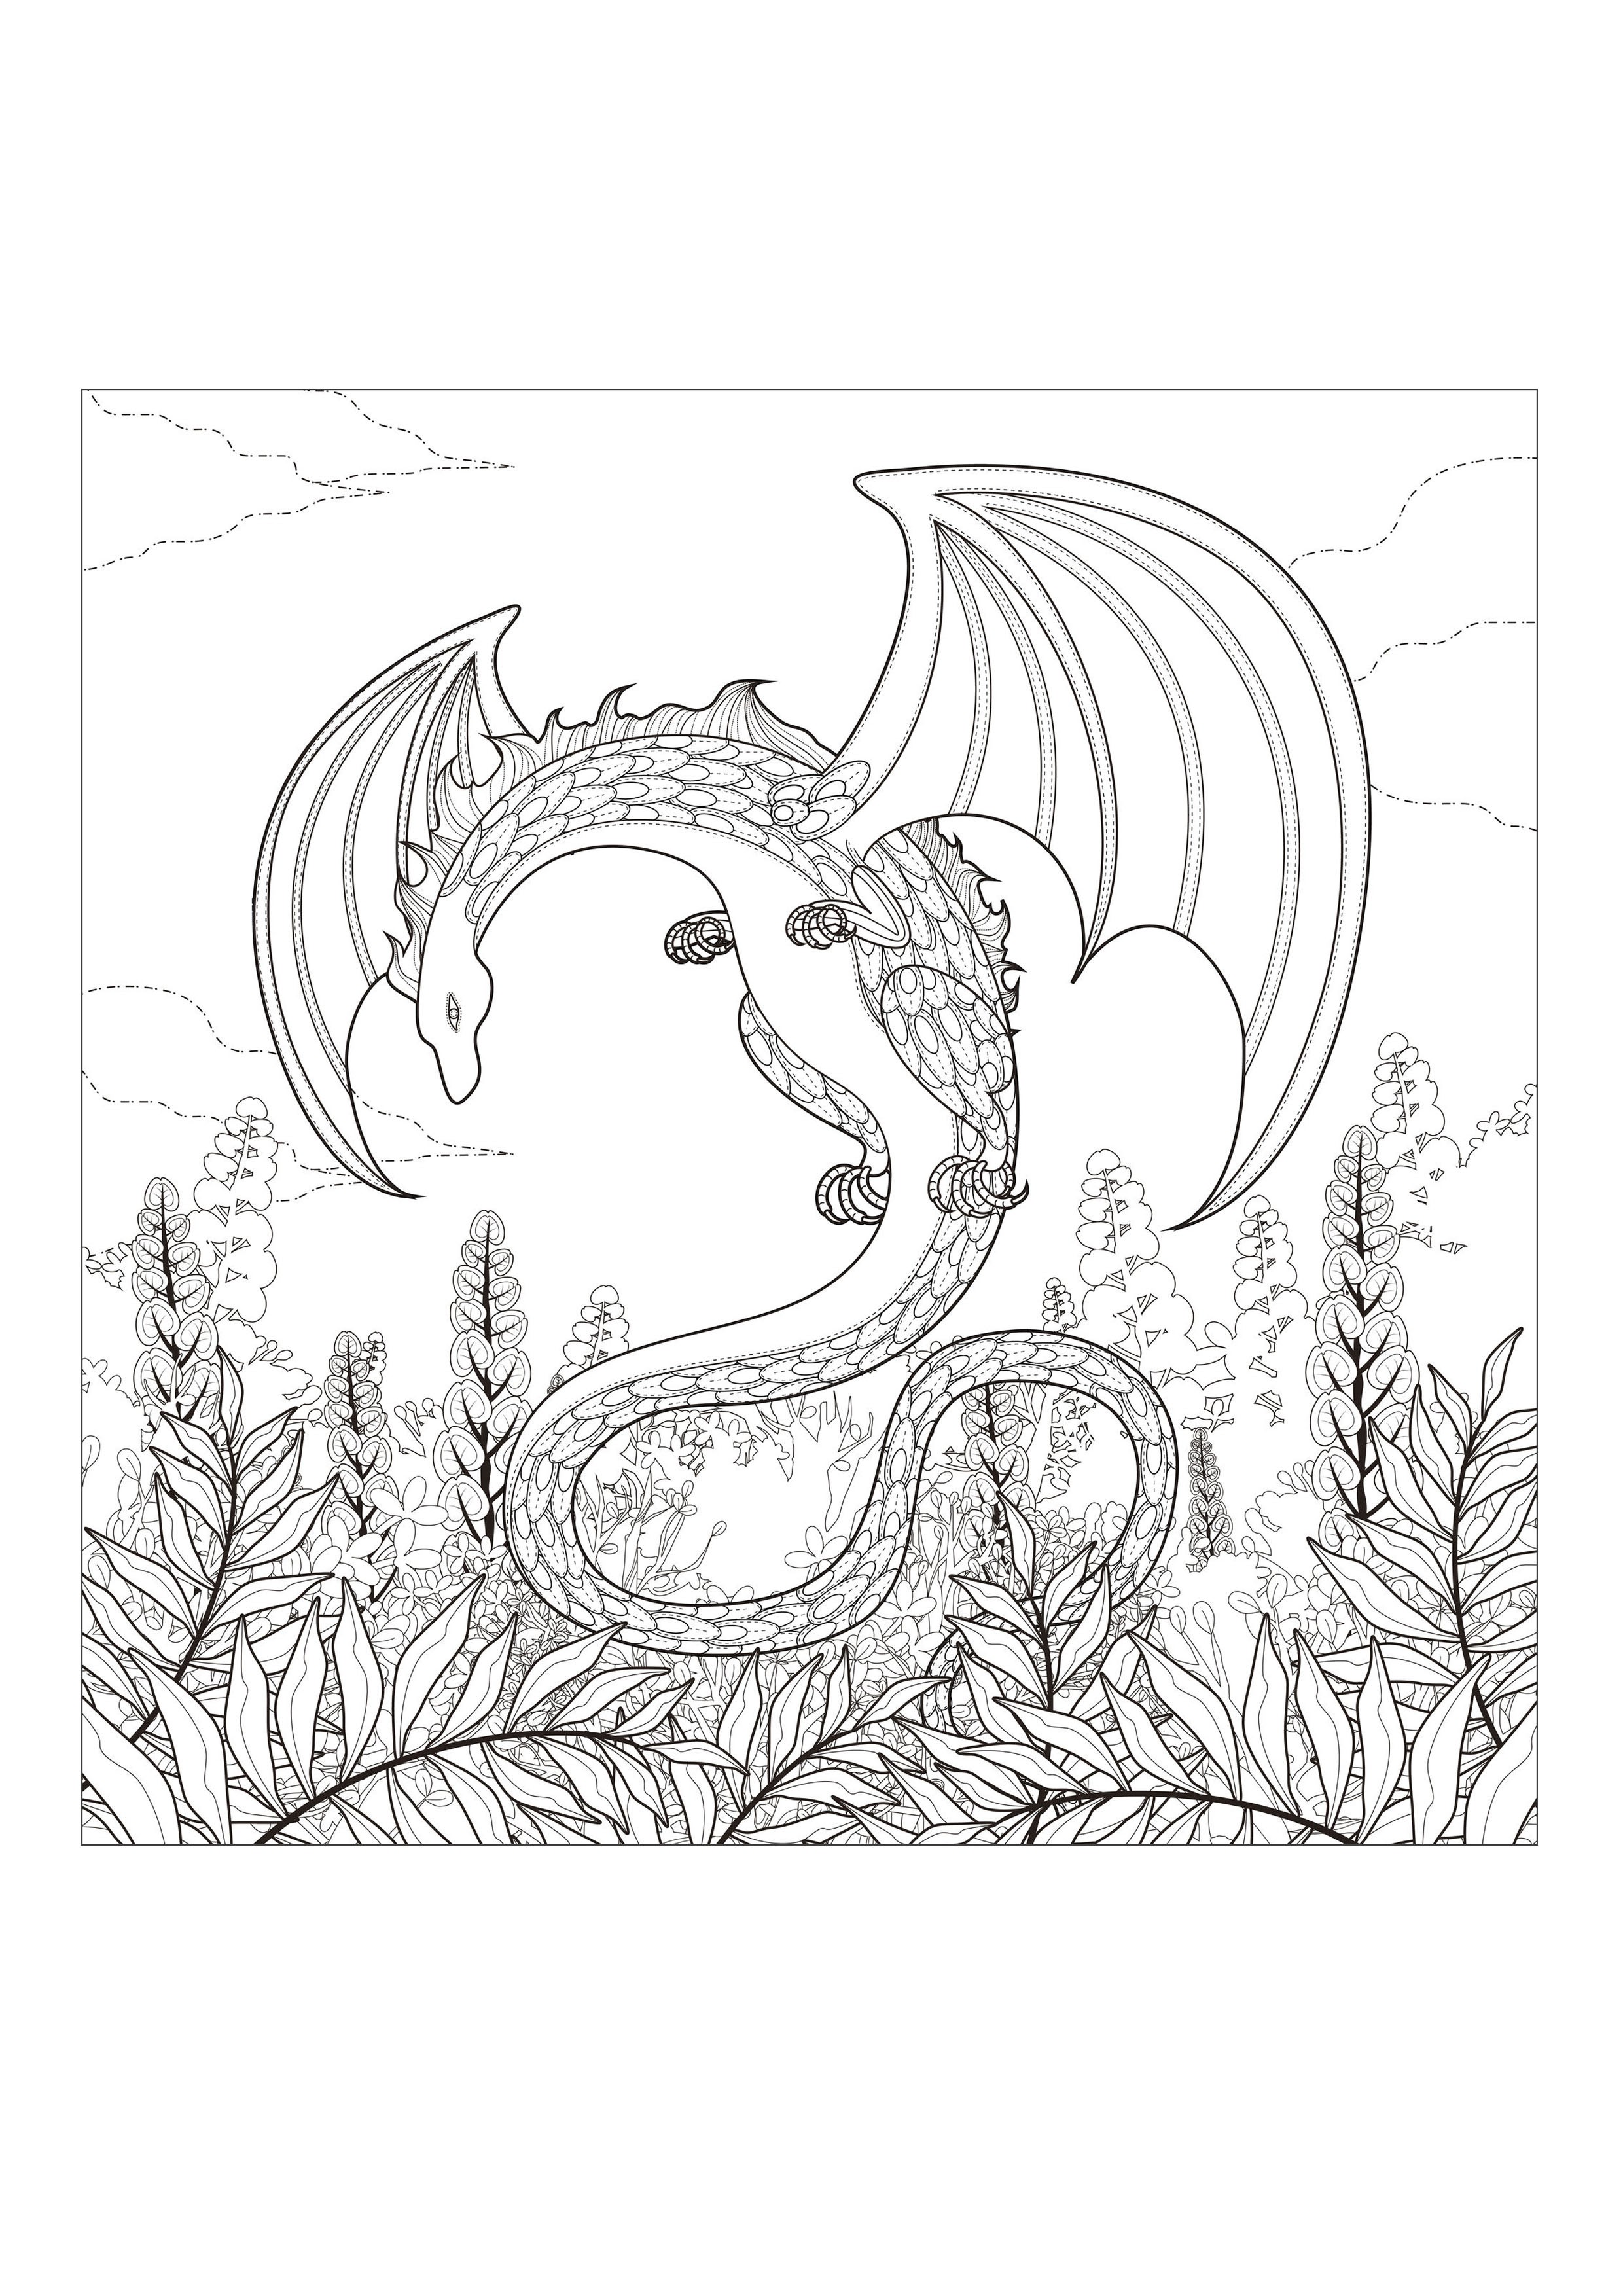 Good Dragon Coloring Pages For Adults 83 With Additional Gallery Coloring Ideas with Dragon Coloring Pages